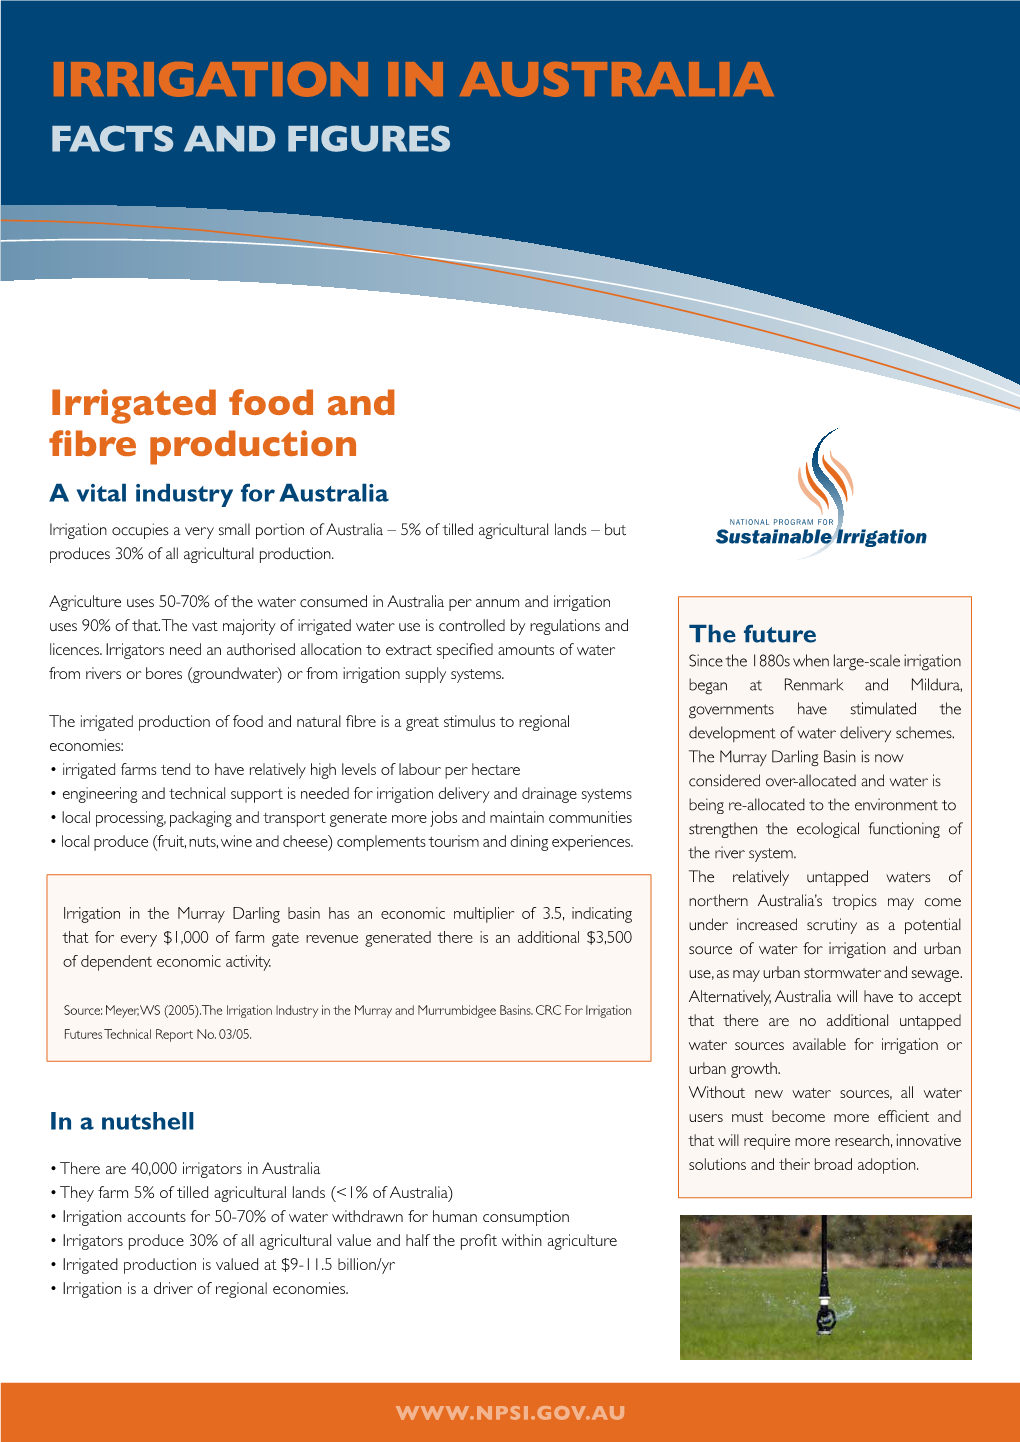 Irrigation in Australia Facts and Figures